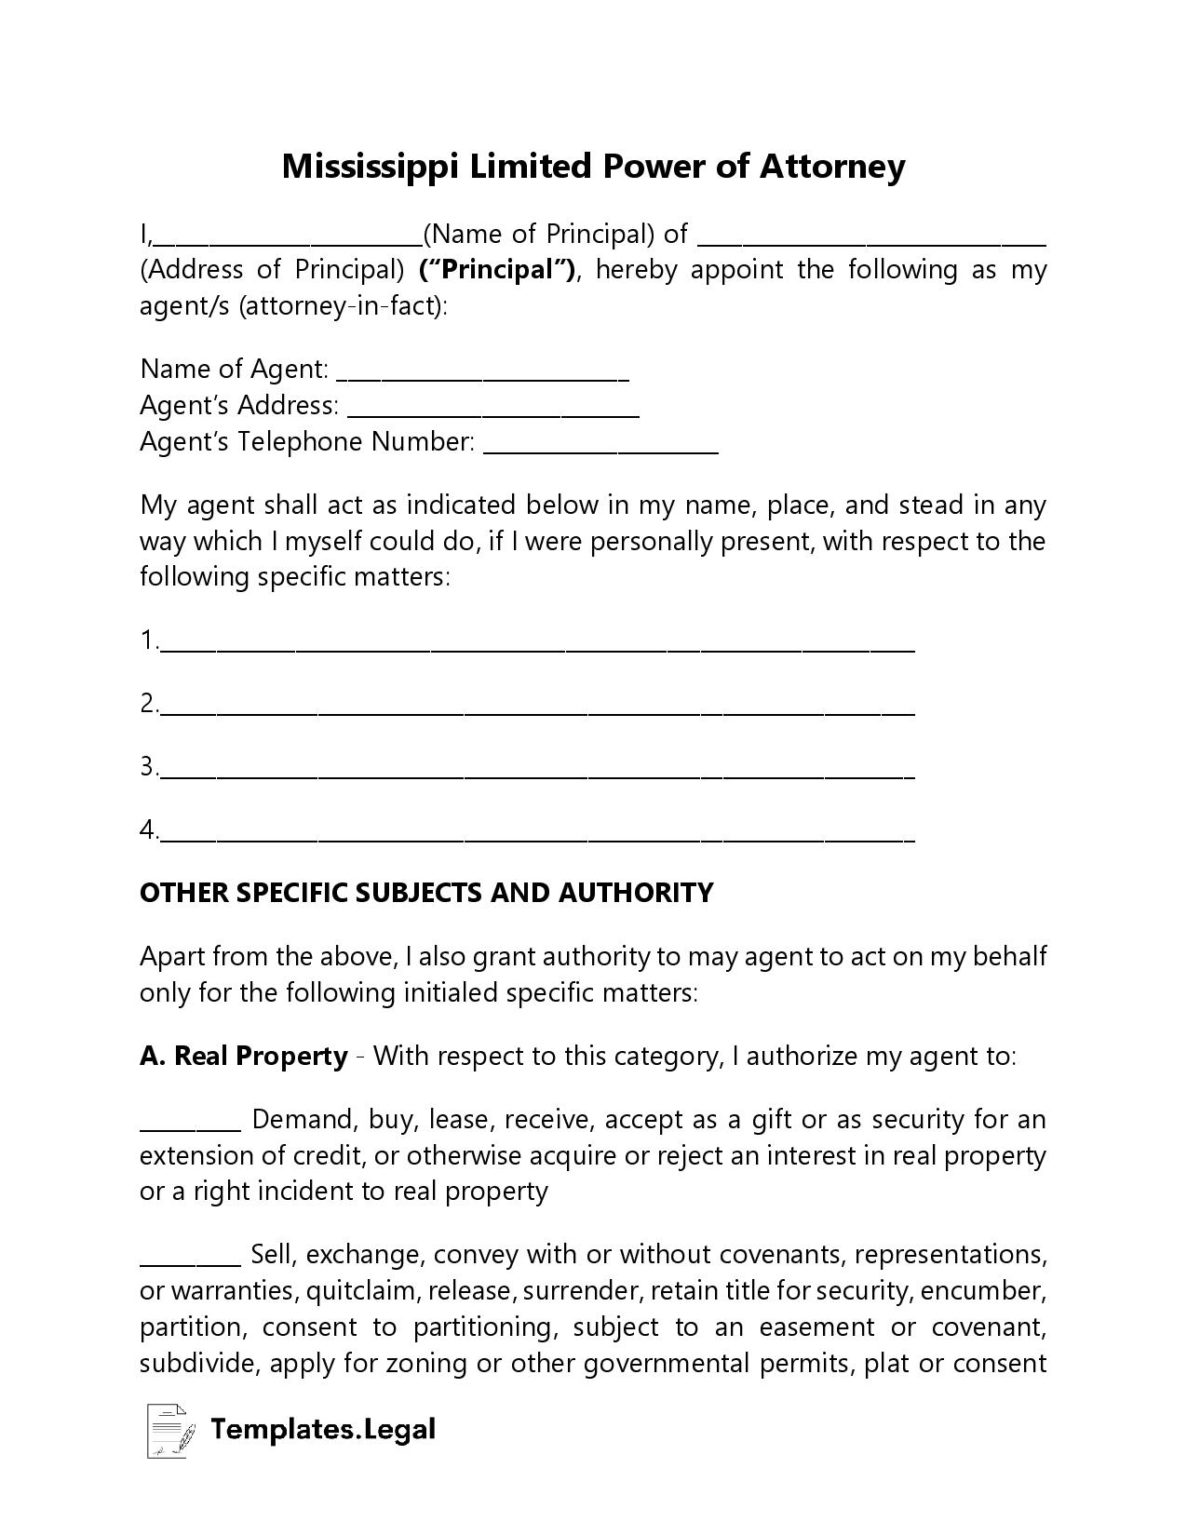 Mississippi Power of Attorney Templates (Free) [Word, PDF & ODT]